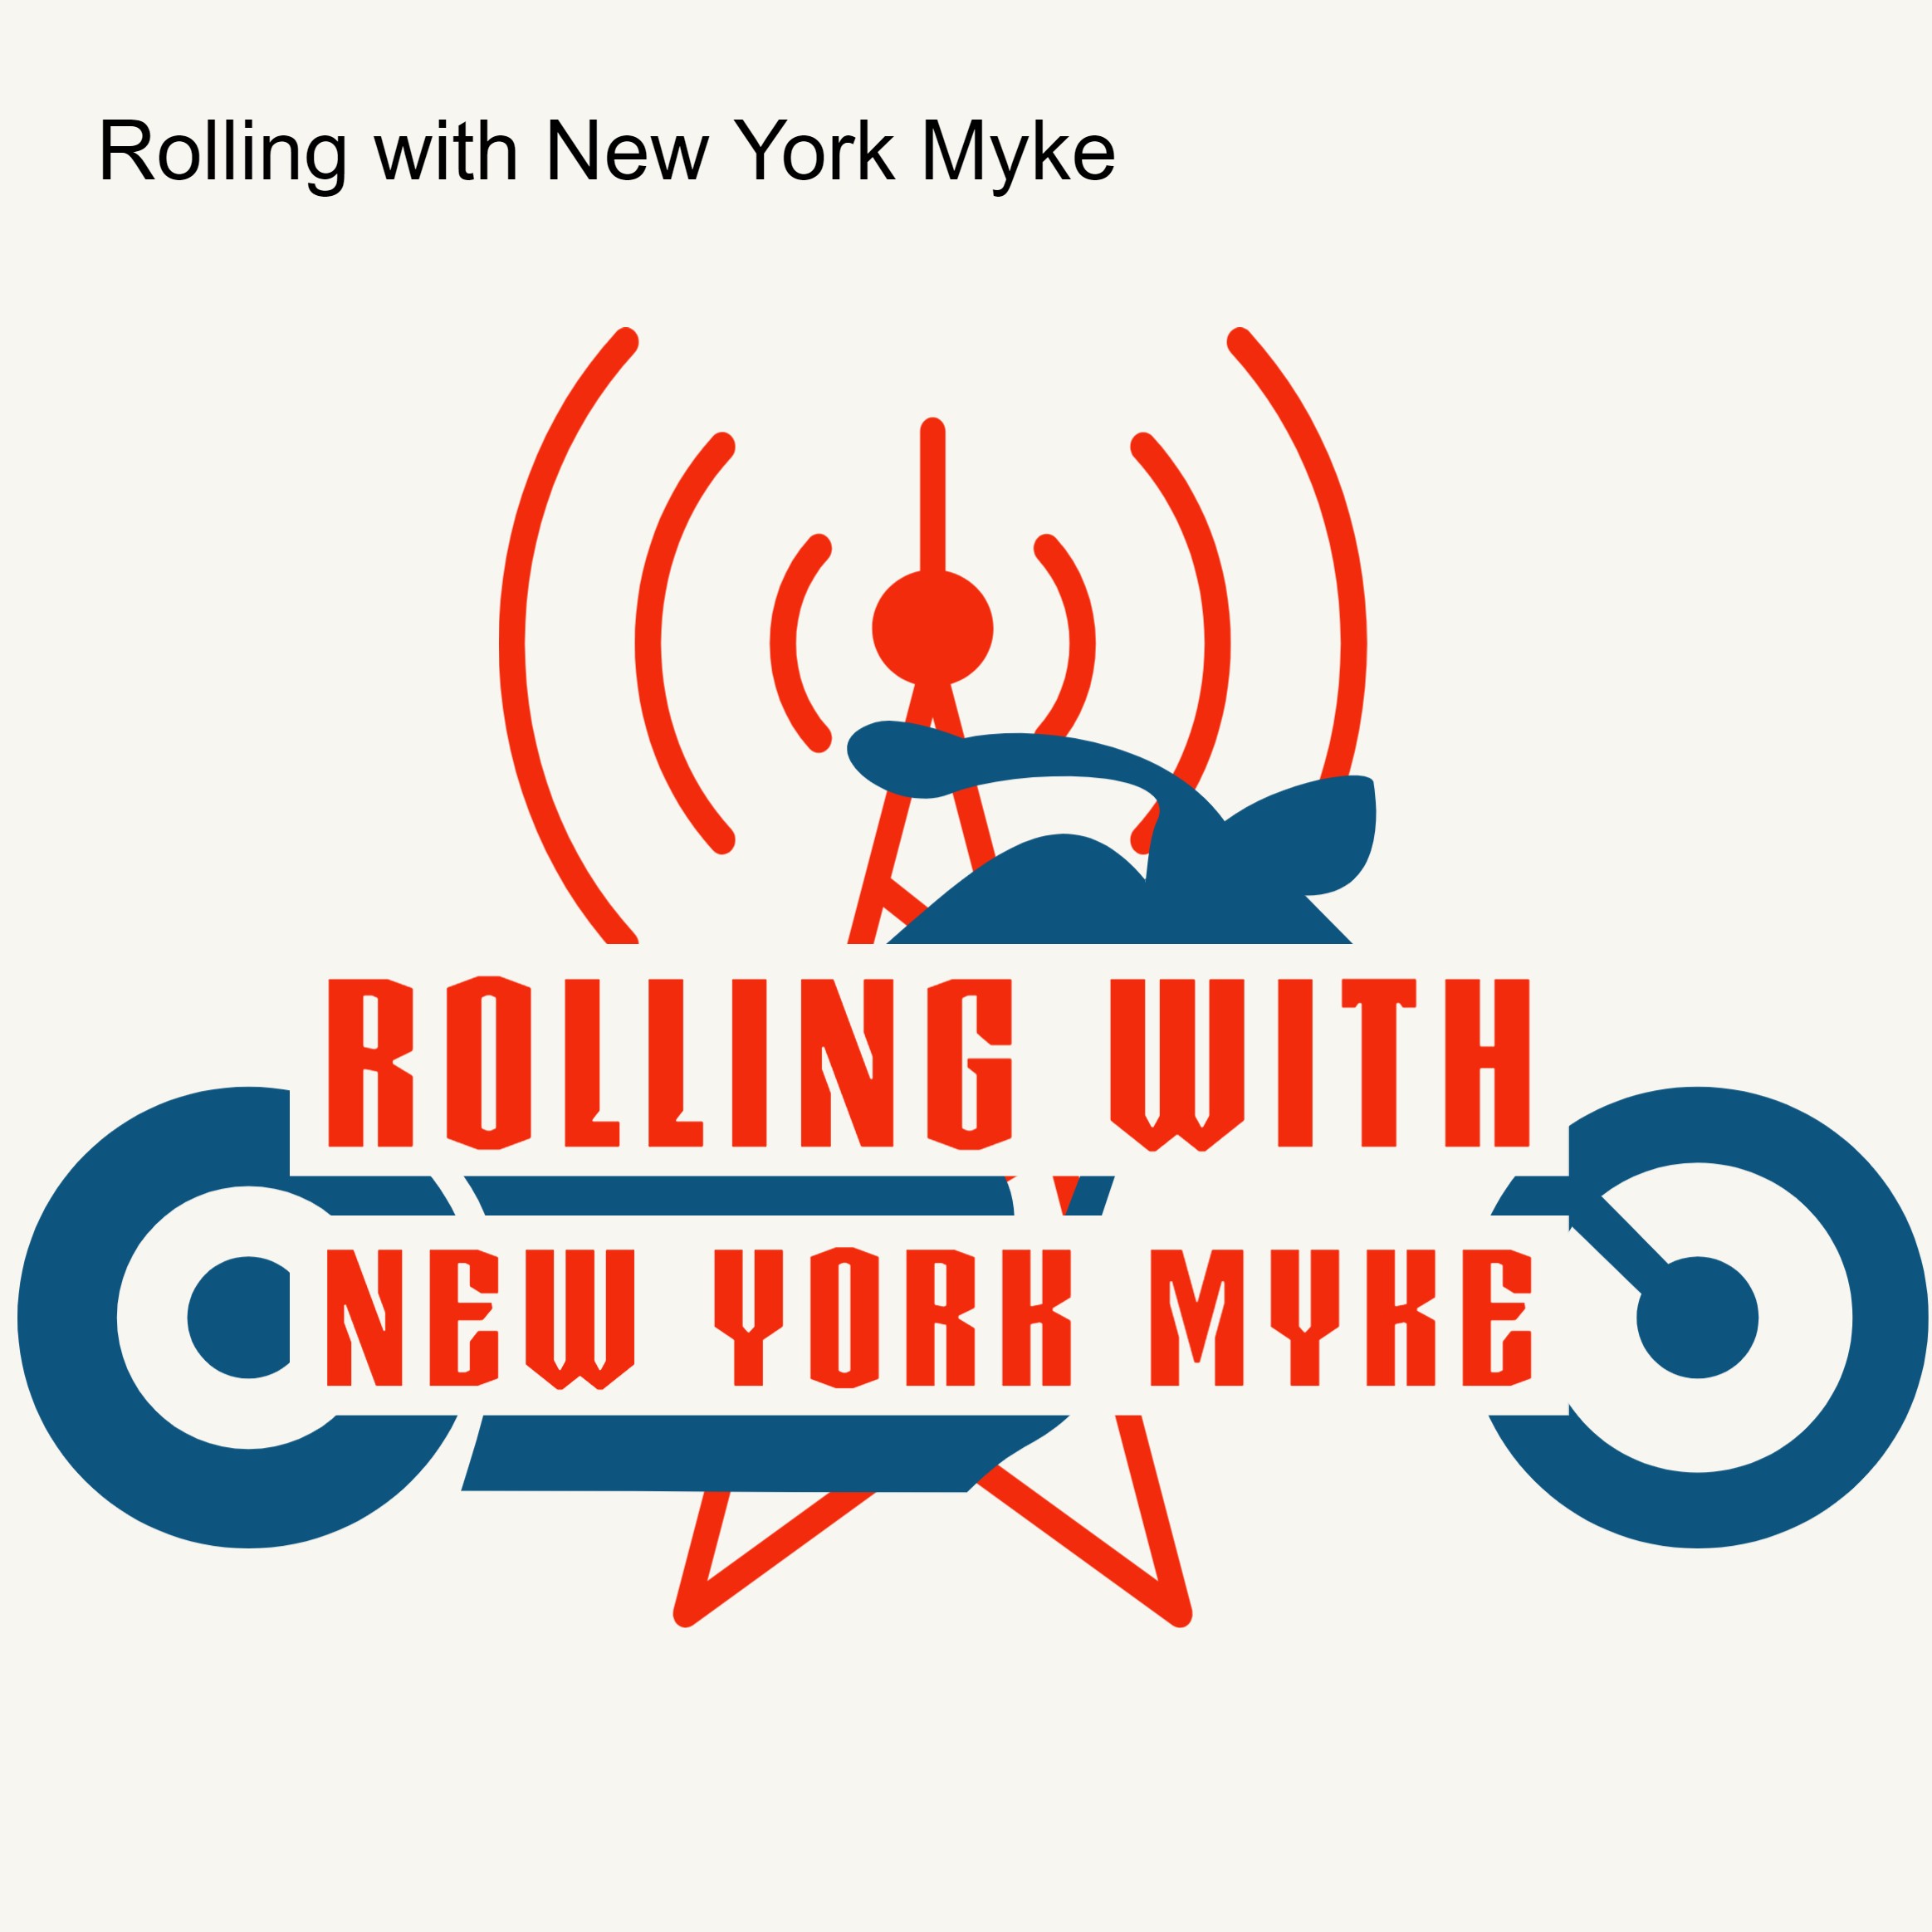 Rolling with New York Myke